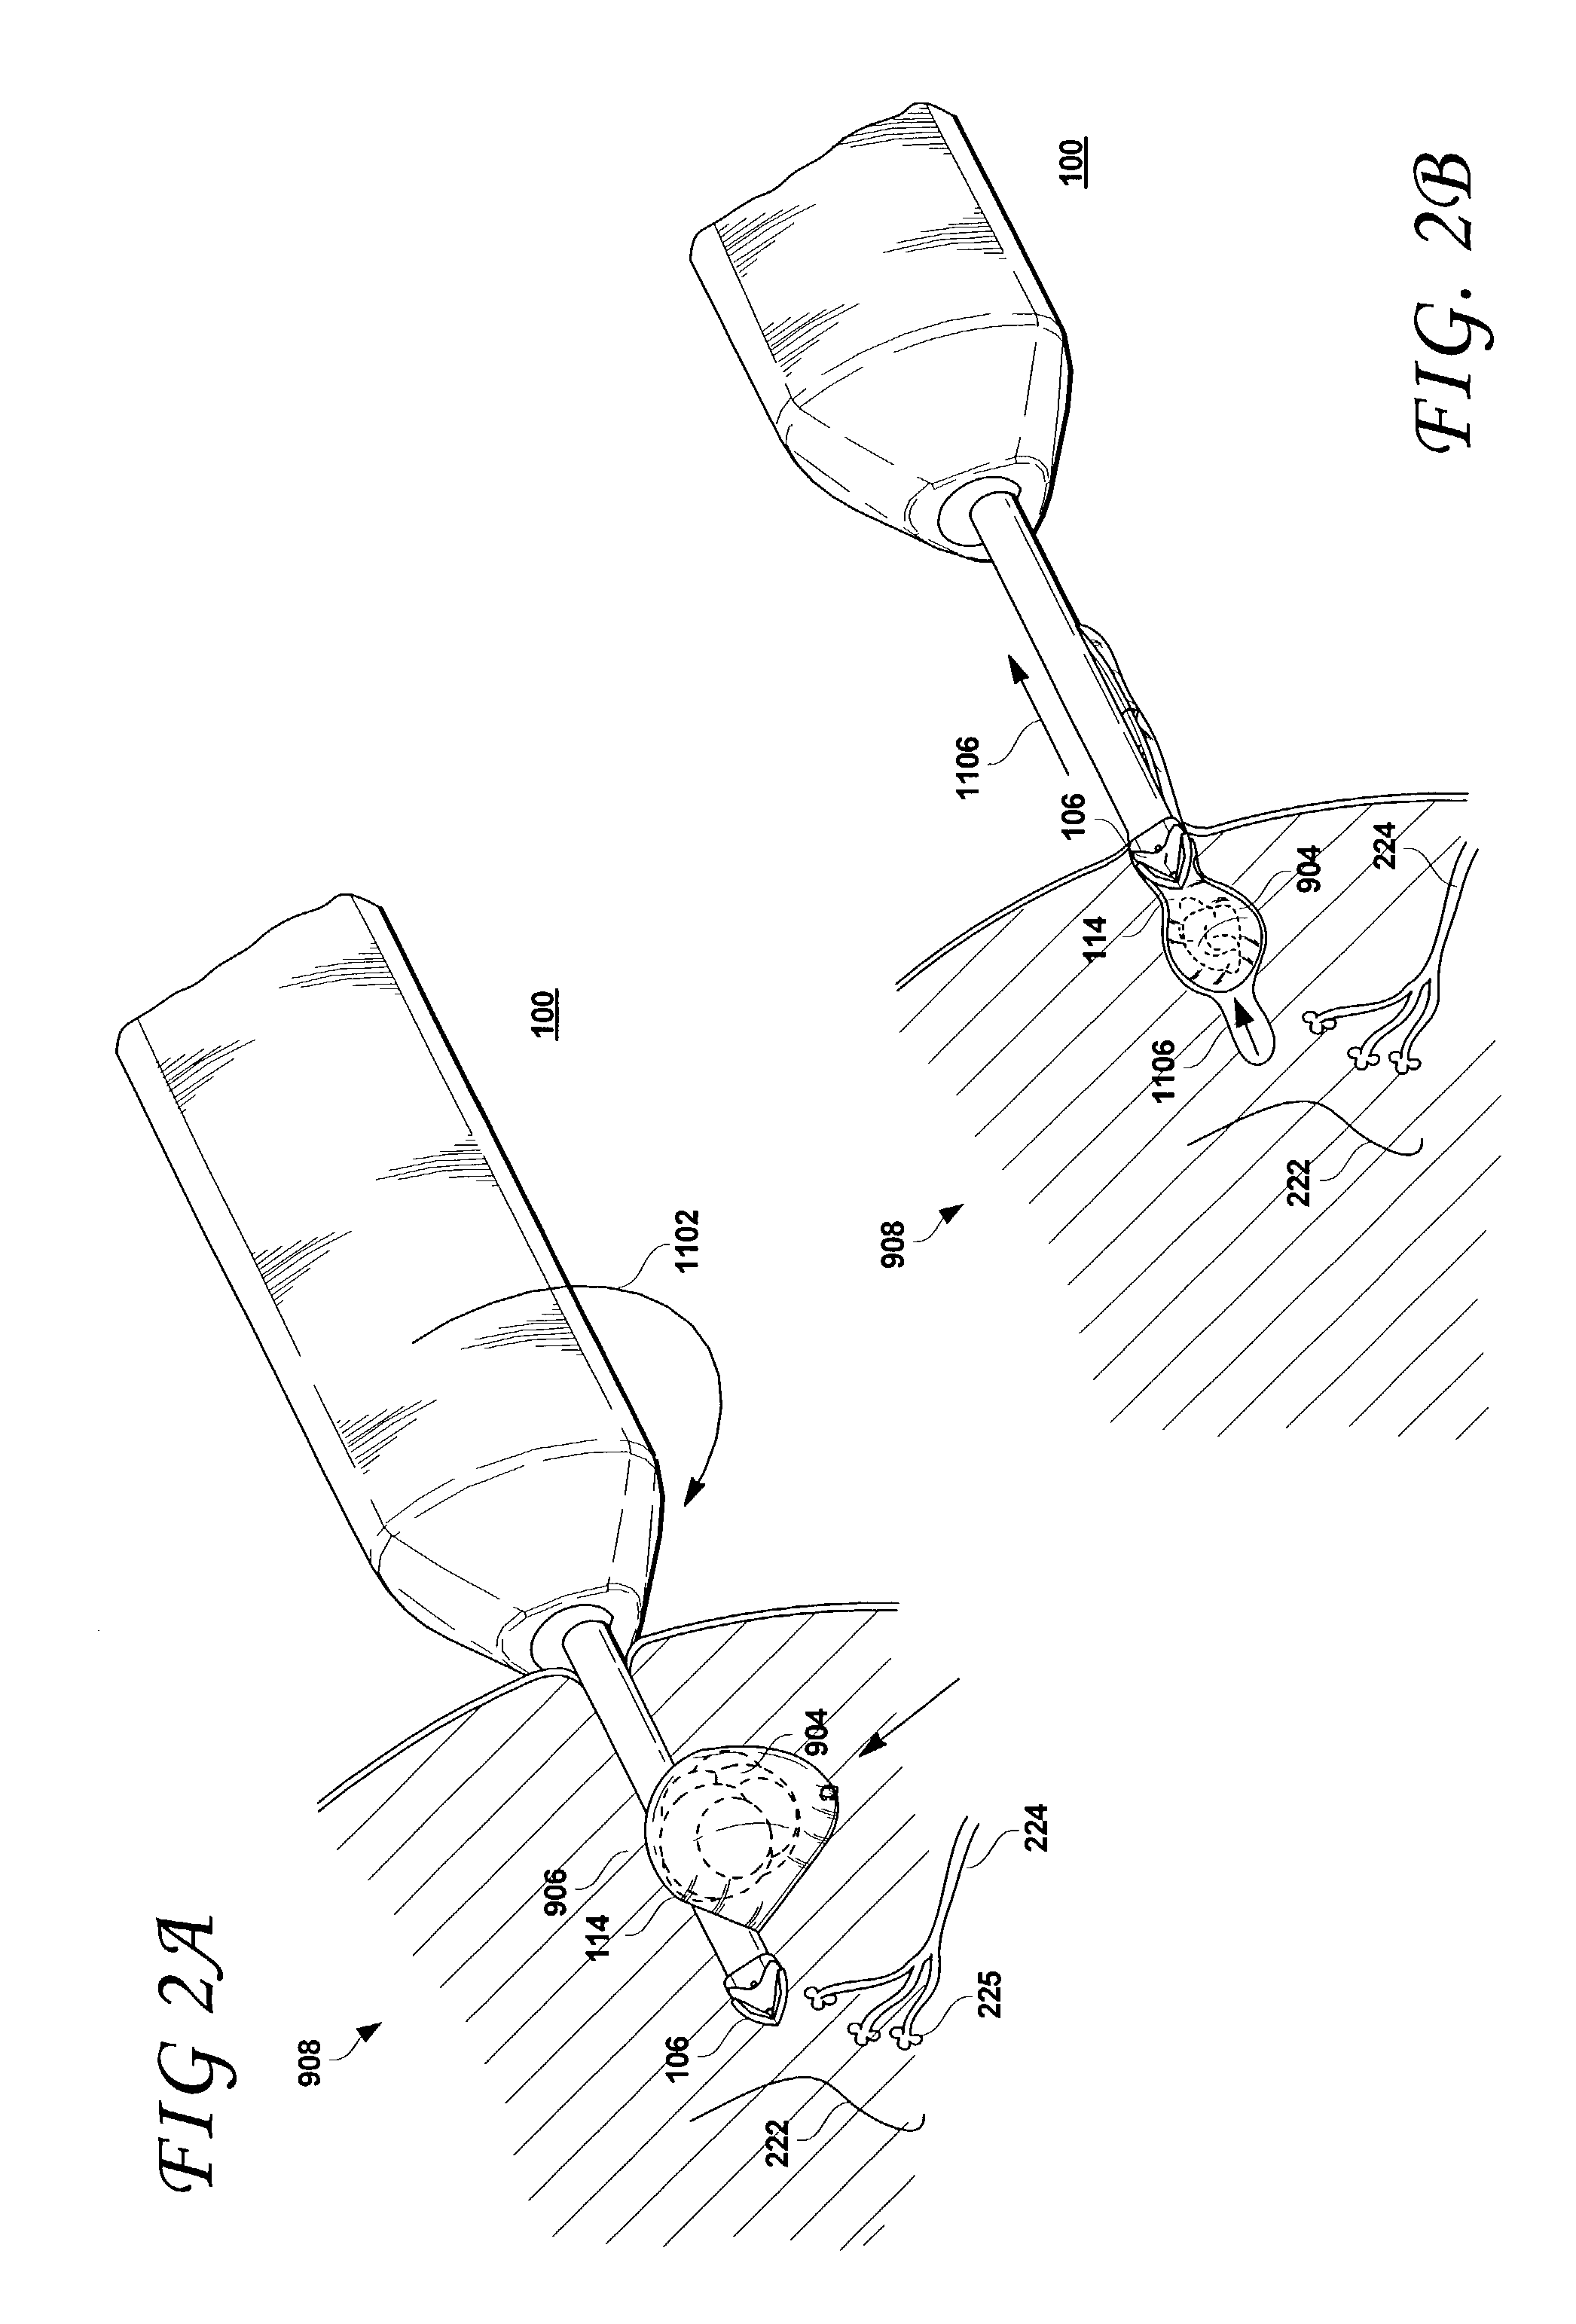 Excisional devices having selective cutting and atraumatic configurations and methods of using same